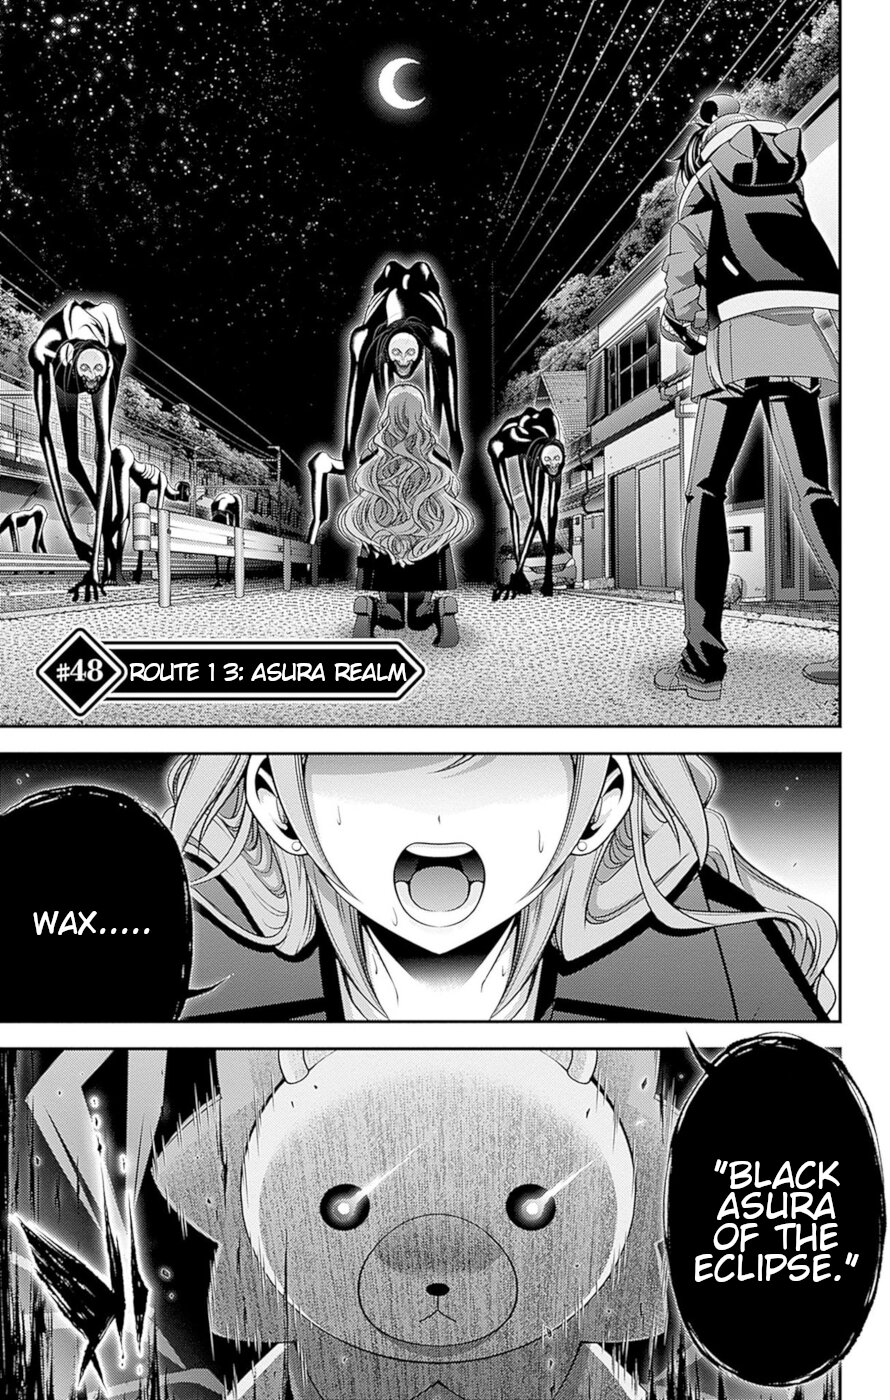 Dark Gathering Vol.13 Chapter 48: Route 1 3: Asura Realm - Picture 1